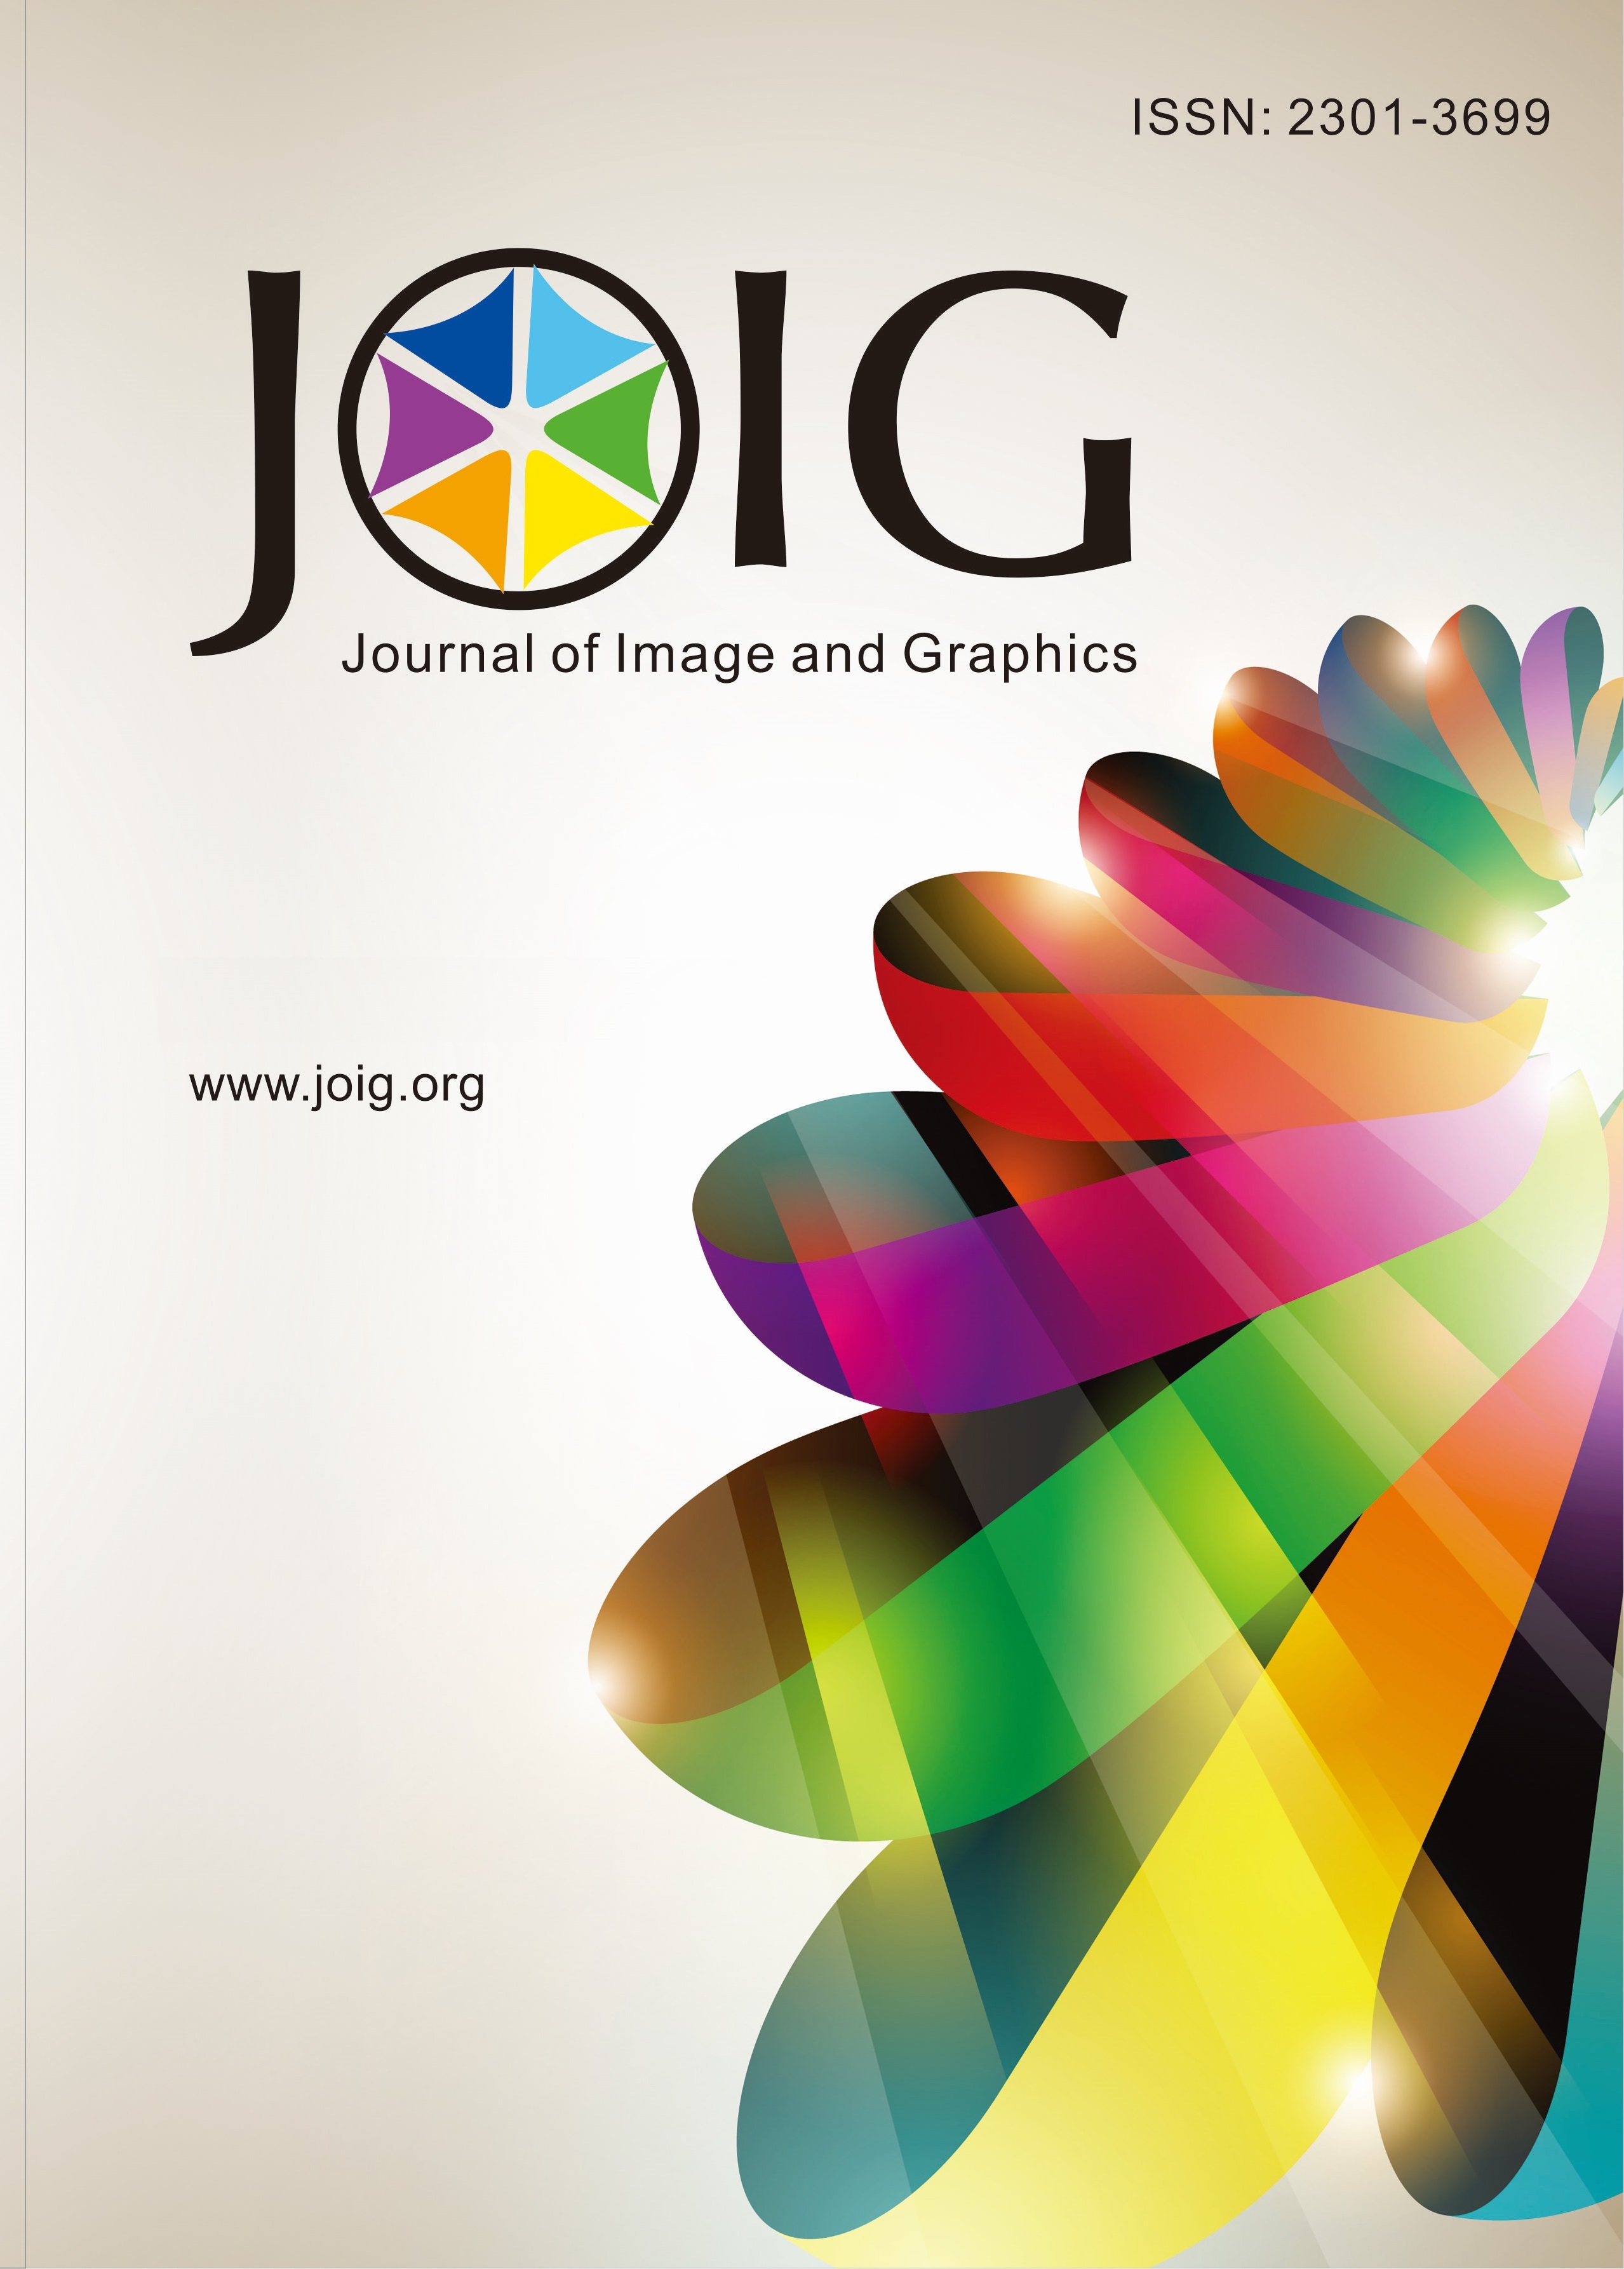 Journal of Image and Graphics